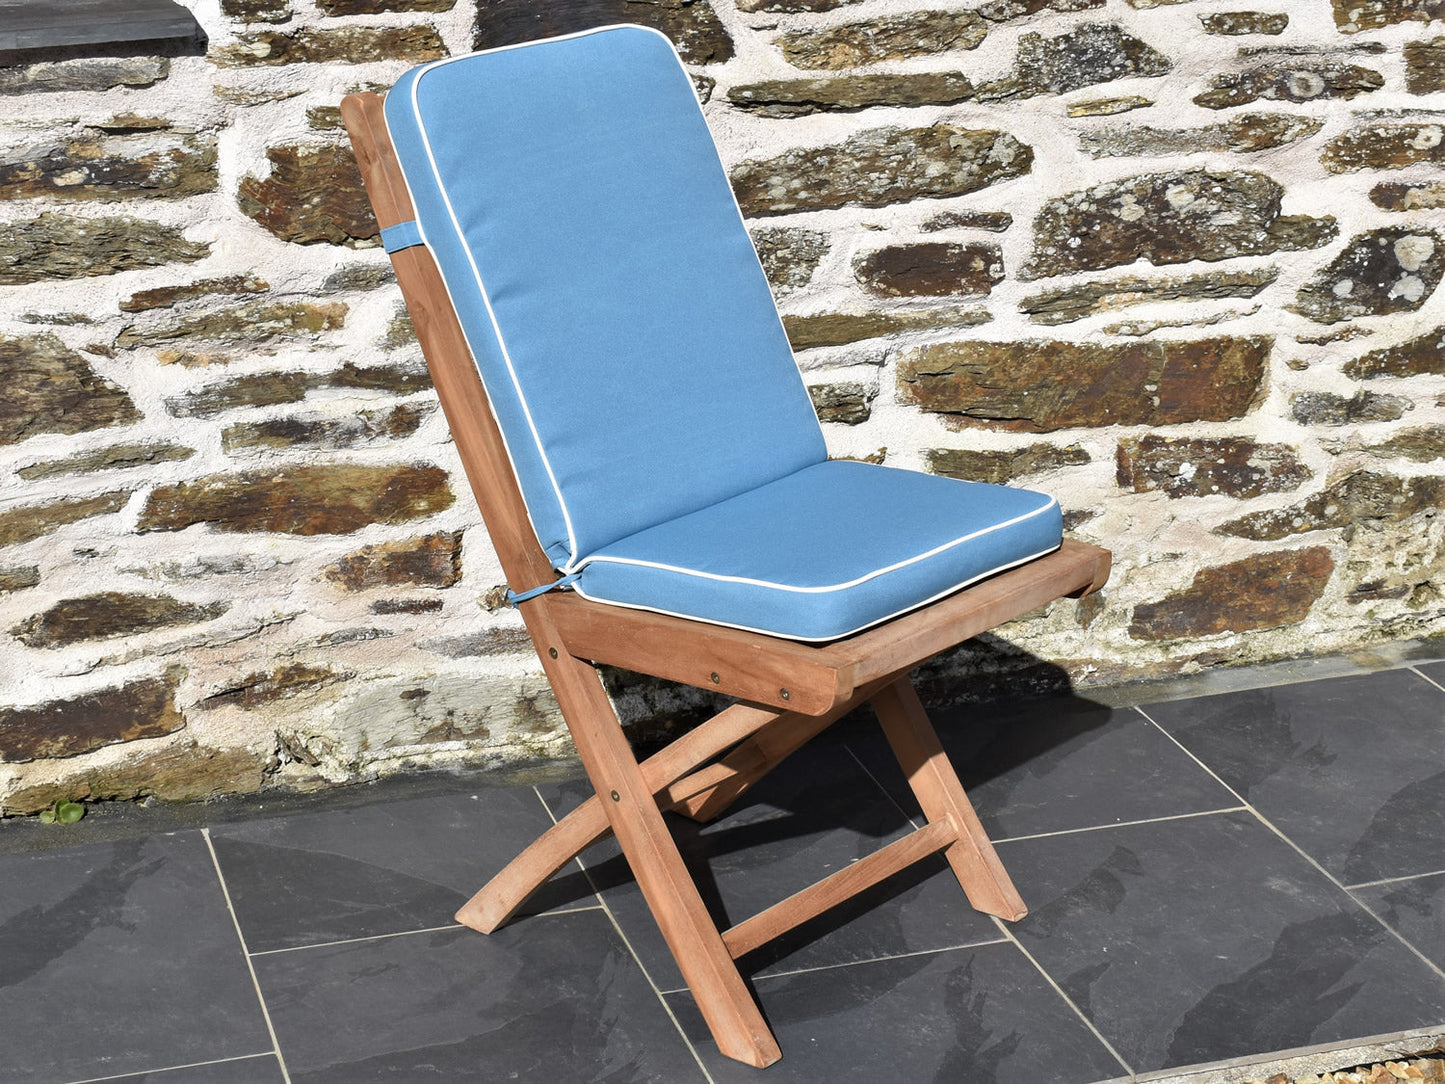 Luxury folding seat pad and back cushion in light blue, designed for teak folding garden chairs